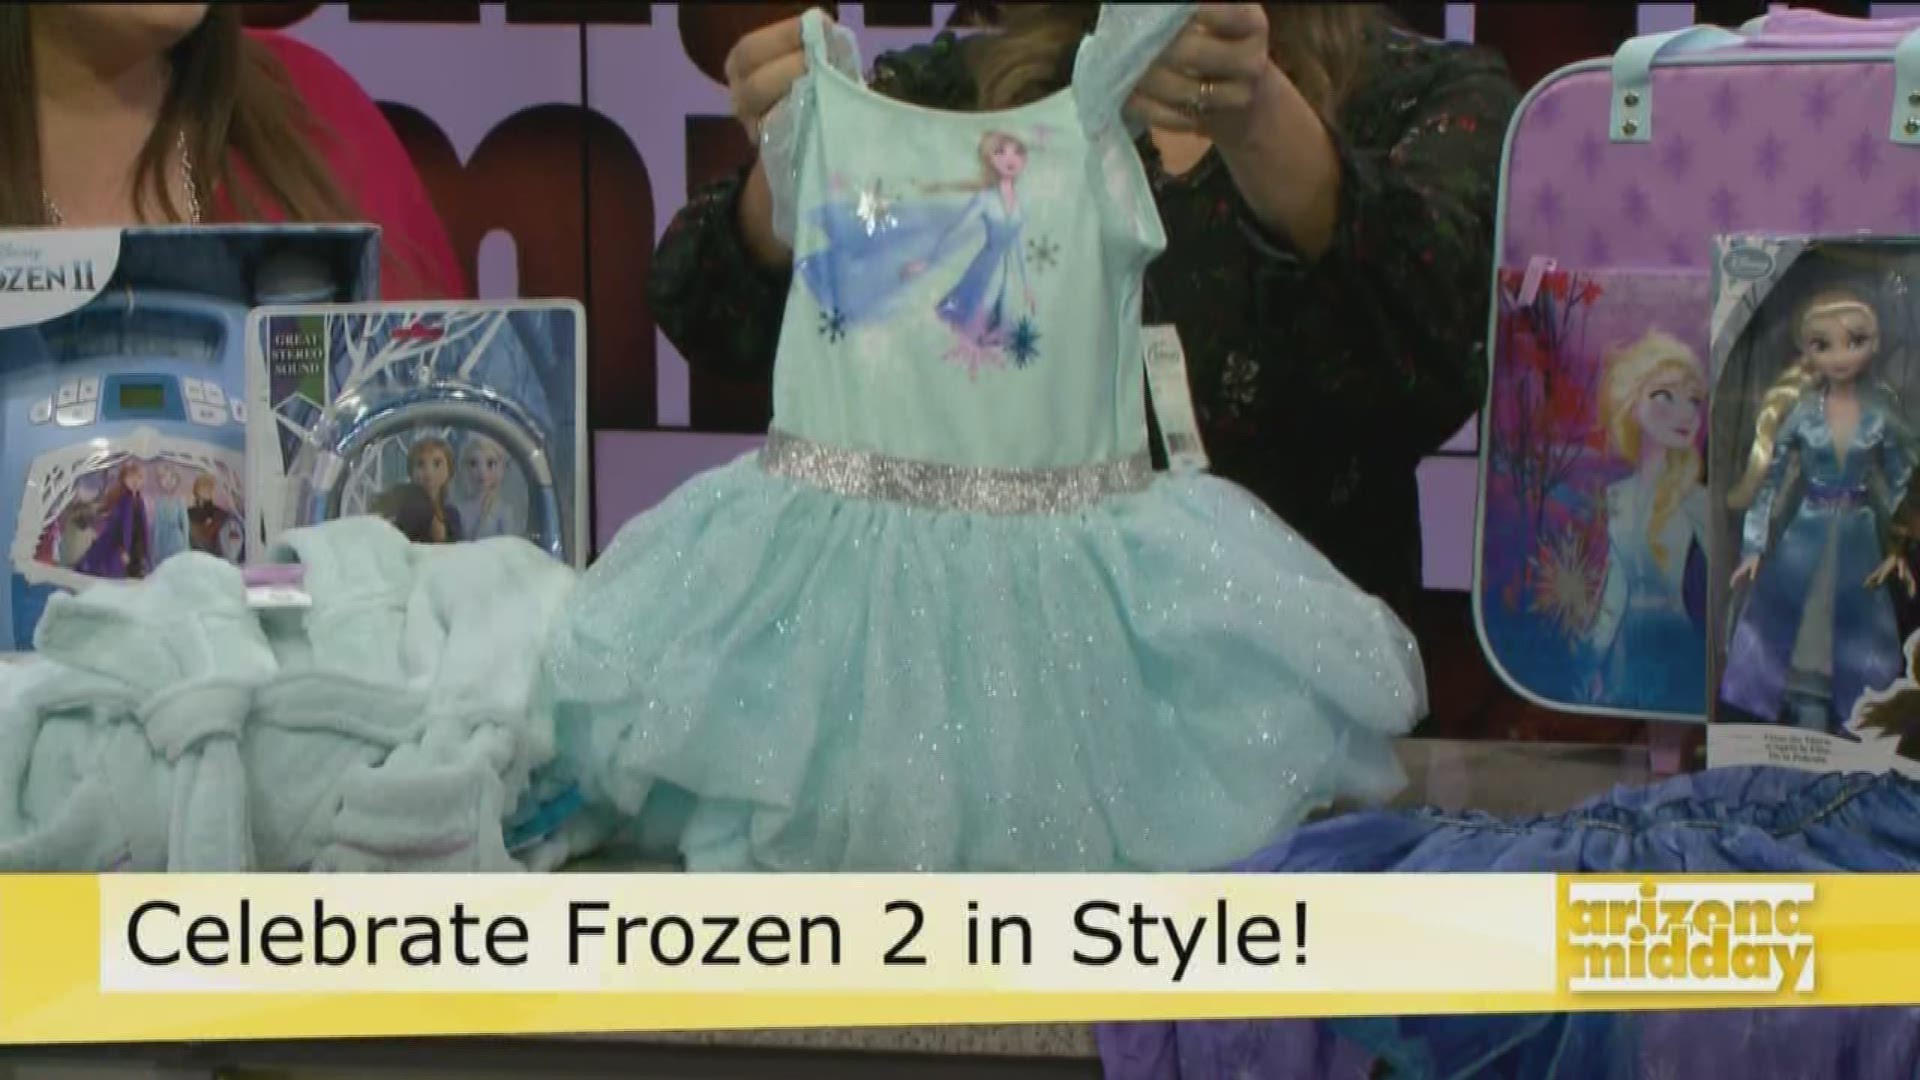 Nikki Skinner, give us the scoop on all of the fun things Frozen we can purchase at JCPenney!